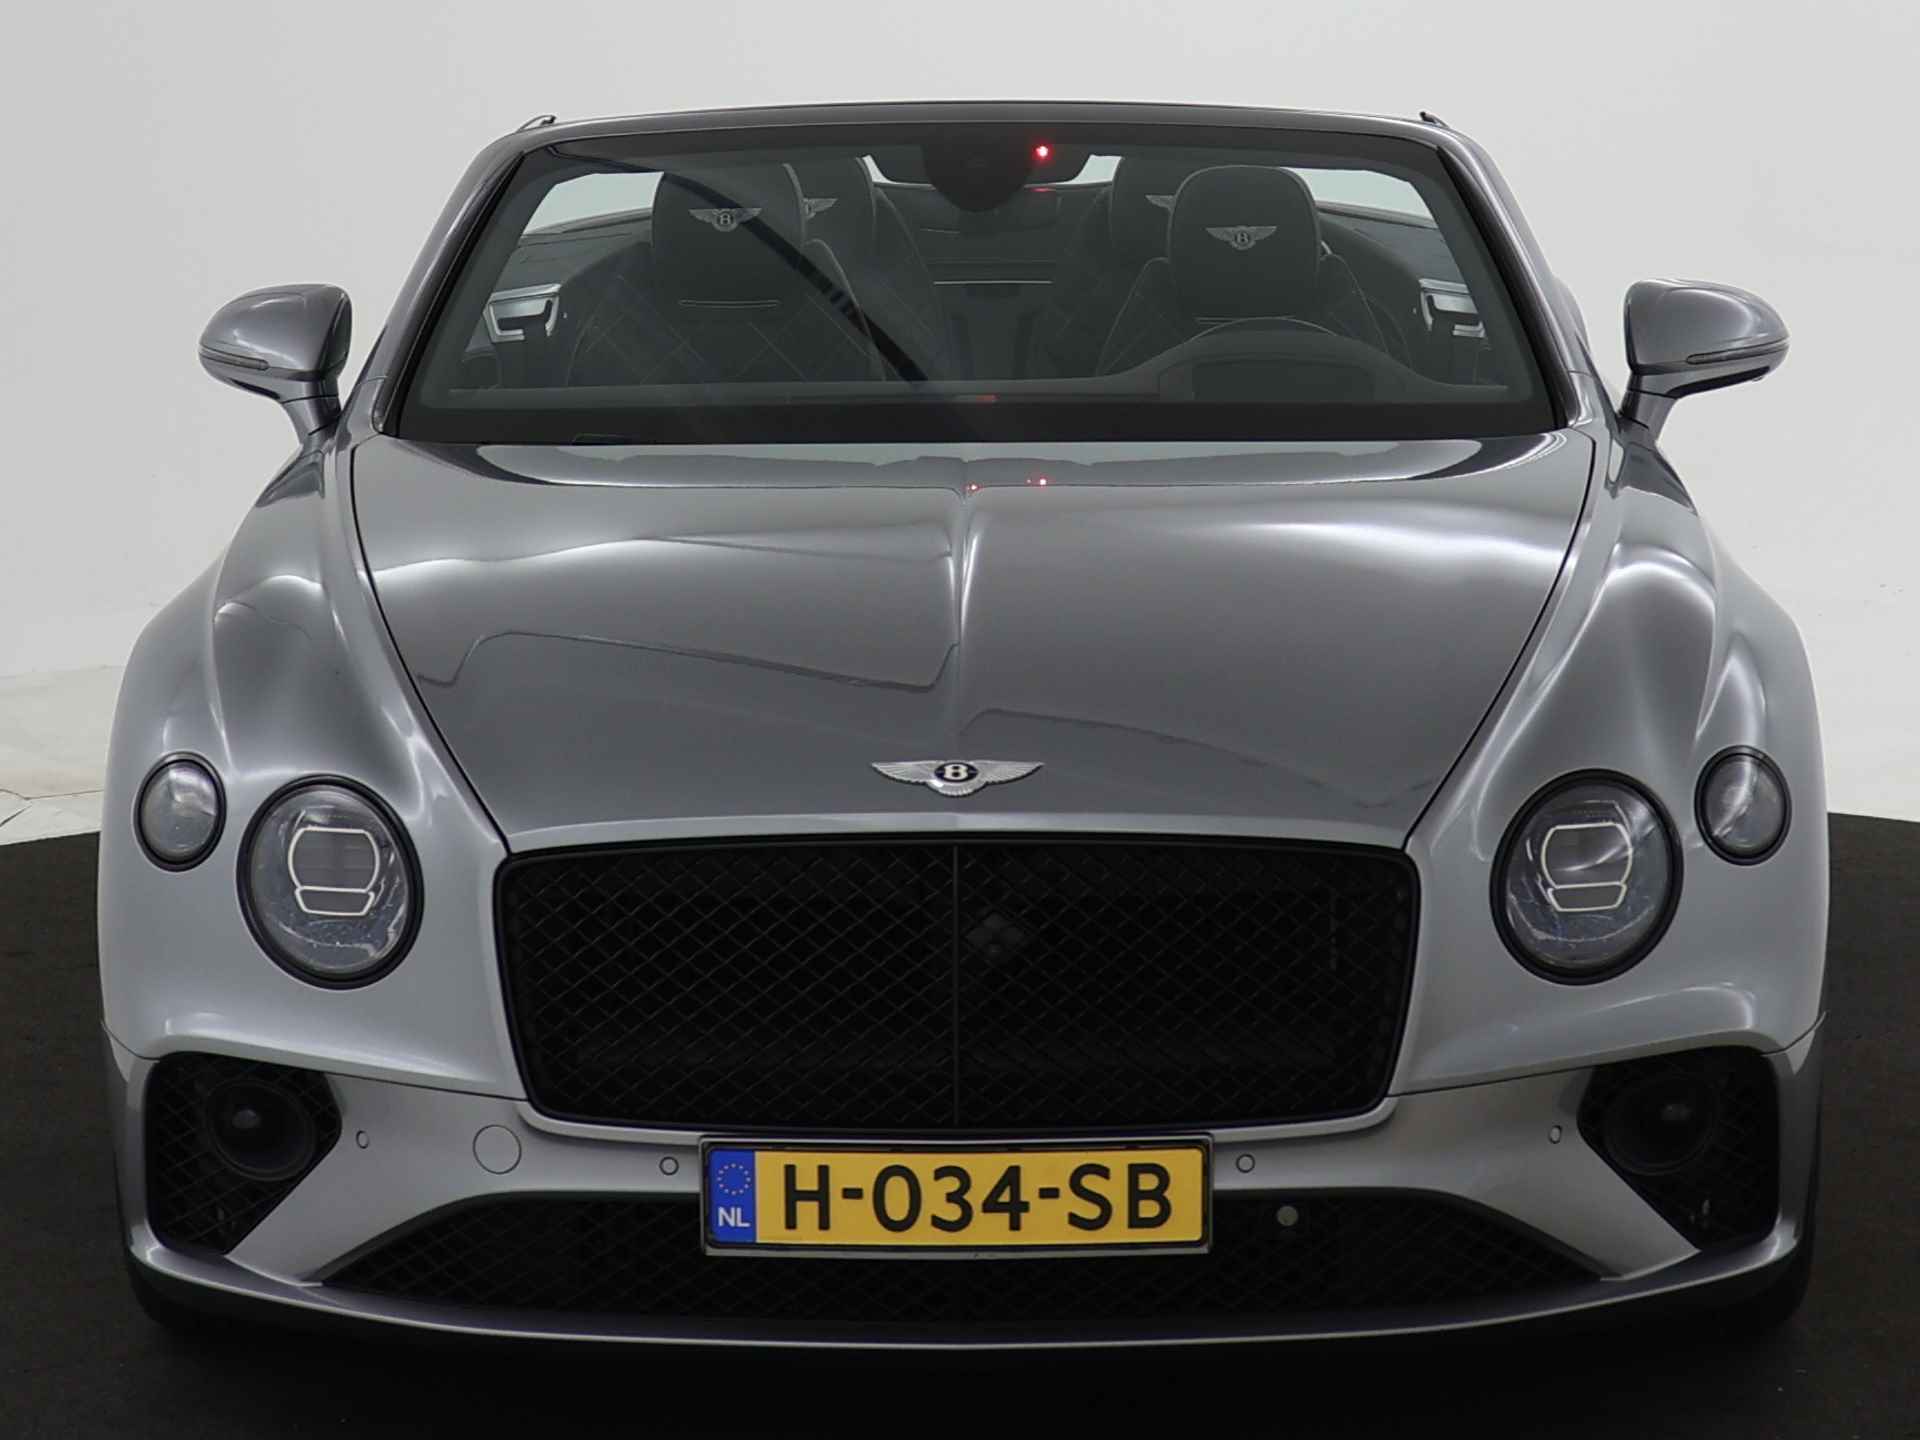 Bentley Continental GTC 6.0 W12 First Edition Mulliner - Bang & Olufsen - Black package - Massage seats - 22/46